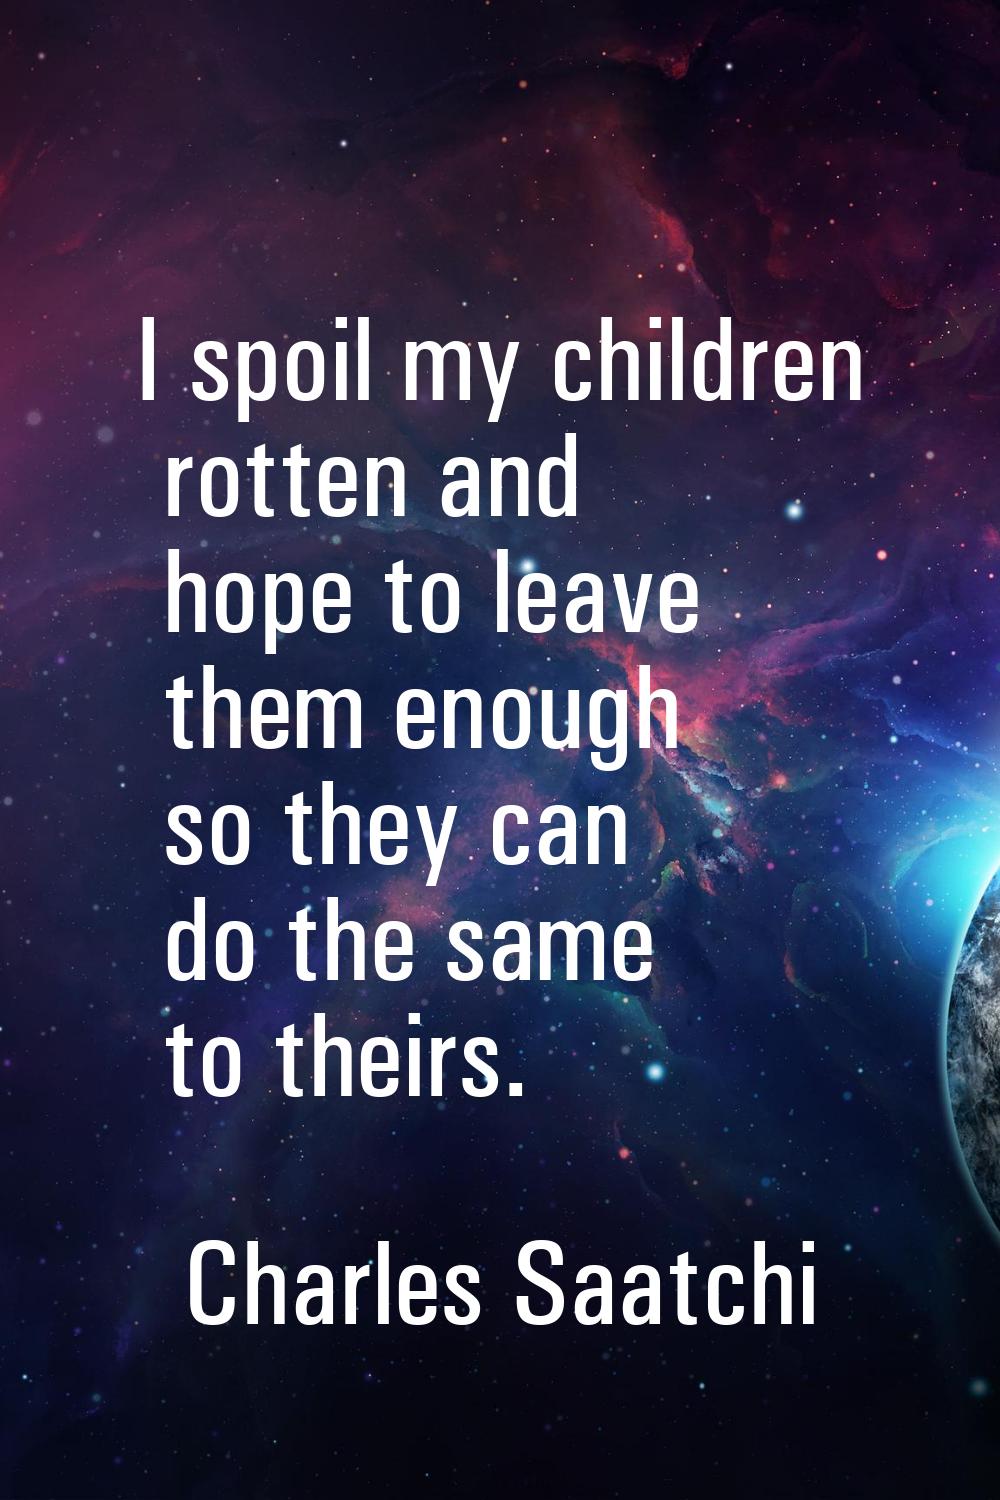 I spoil my children rotten and hope to leave them enough so they can do the same to theirs.